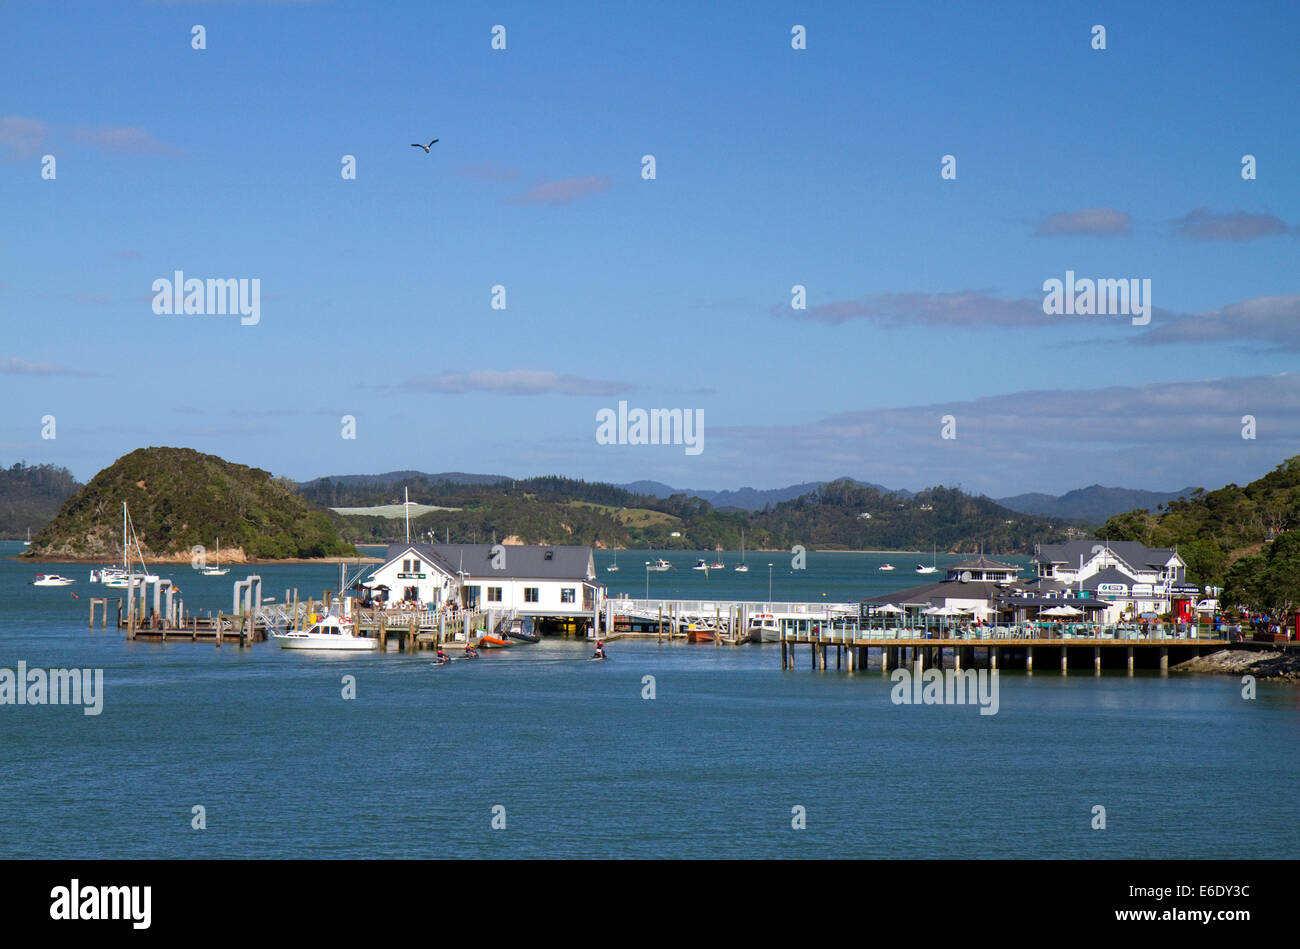 Bay of Islands at the town of Paihia, North Island, New Zealand. Stock Photo